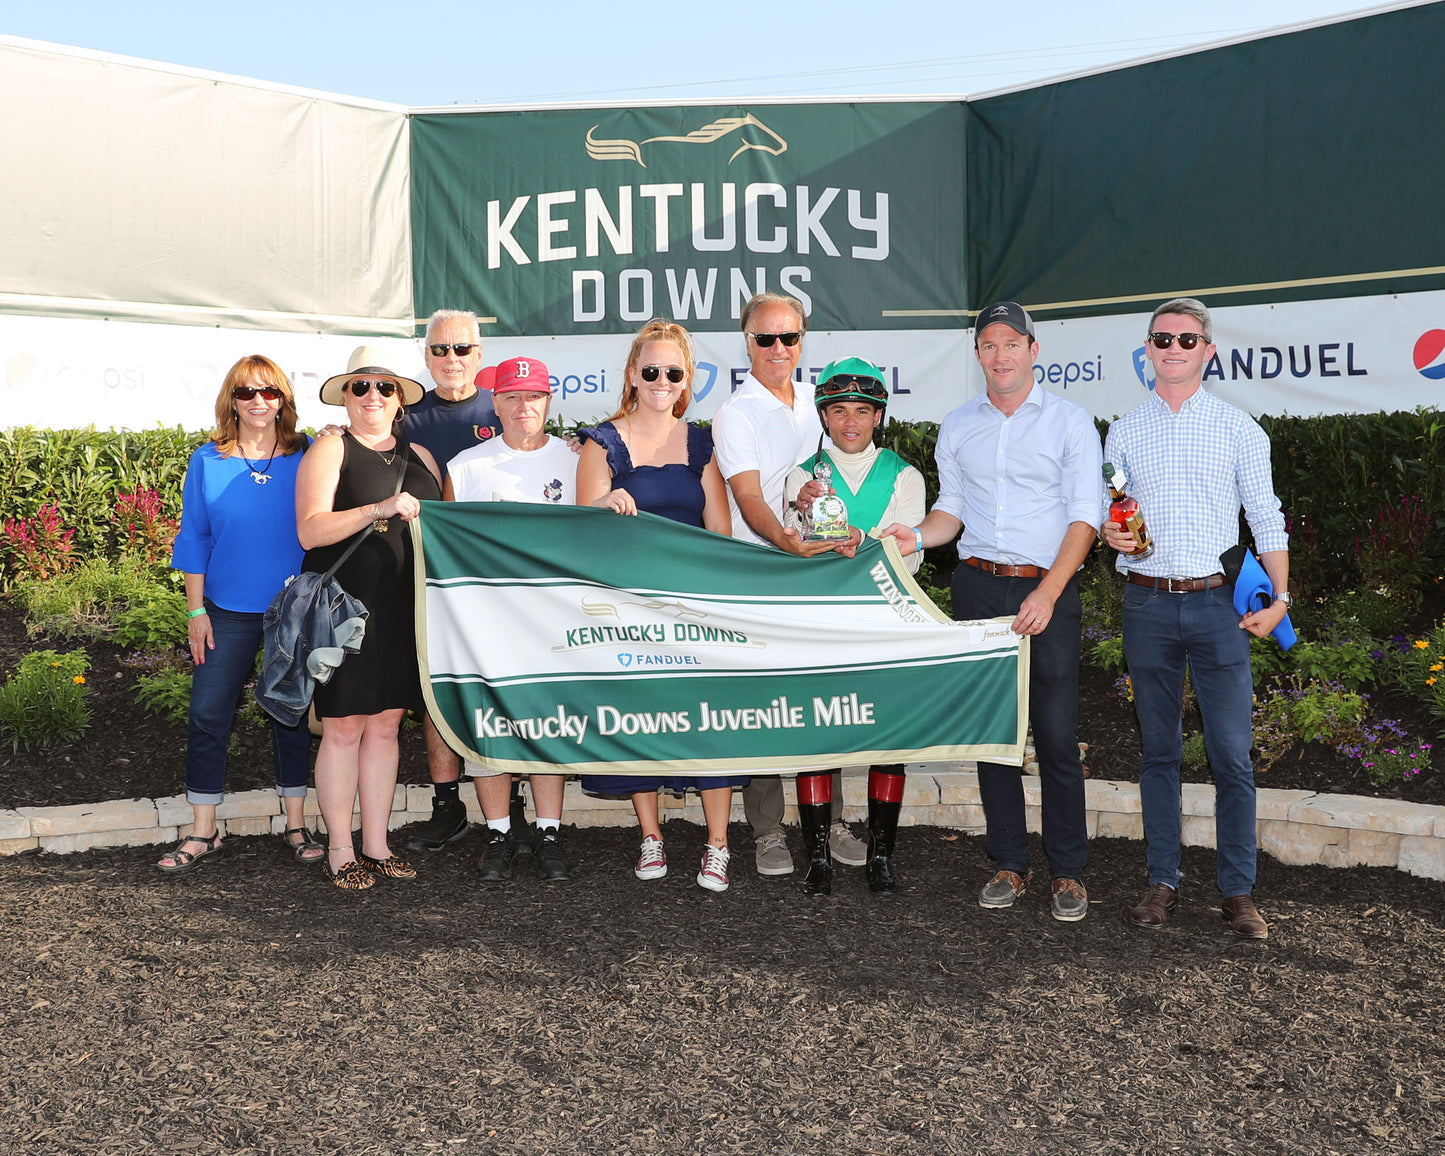 RECKONING FORCE - The Kentucky Downs Juvenile Mile - 11th Running - 09-14-22 - R09 - KD - Presentation